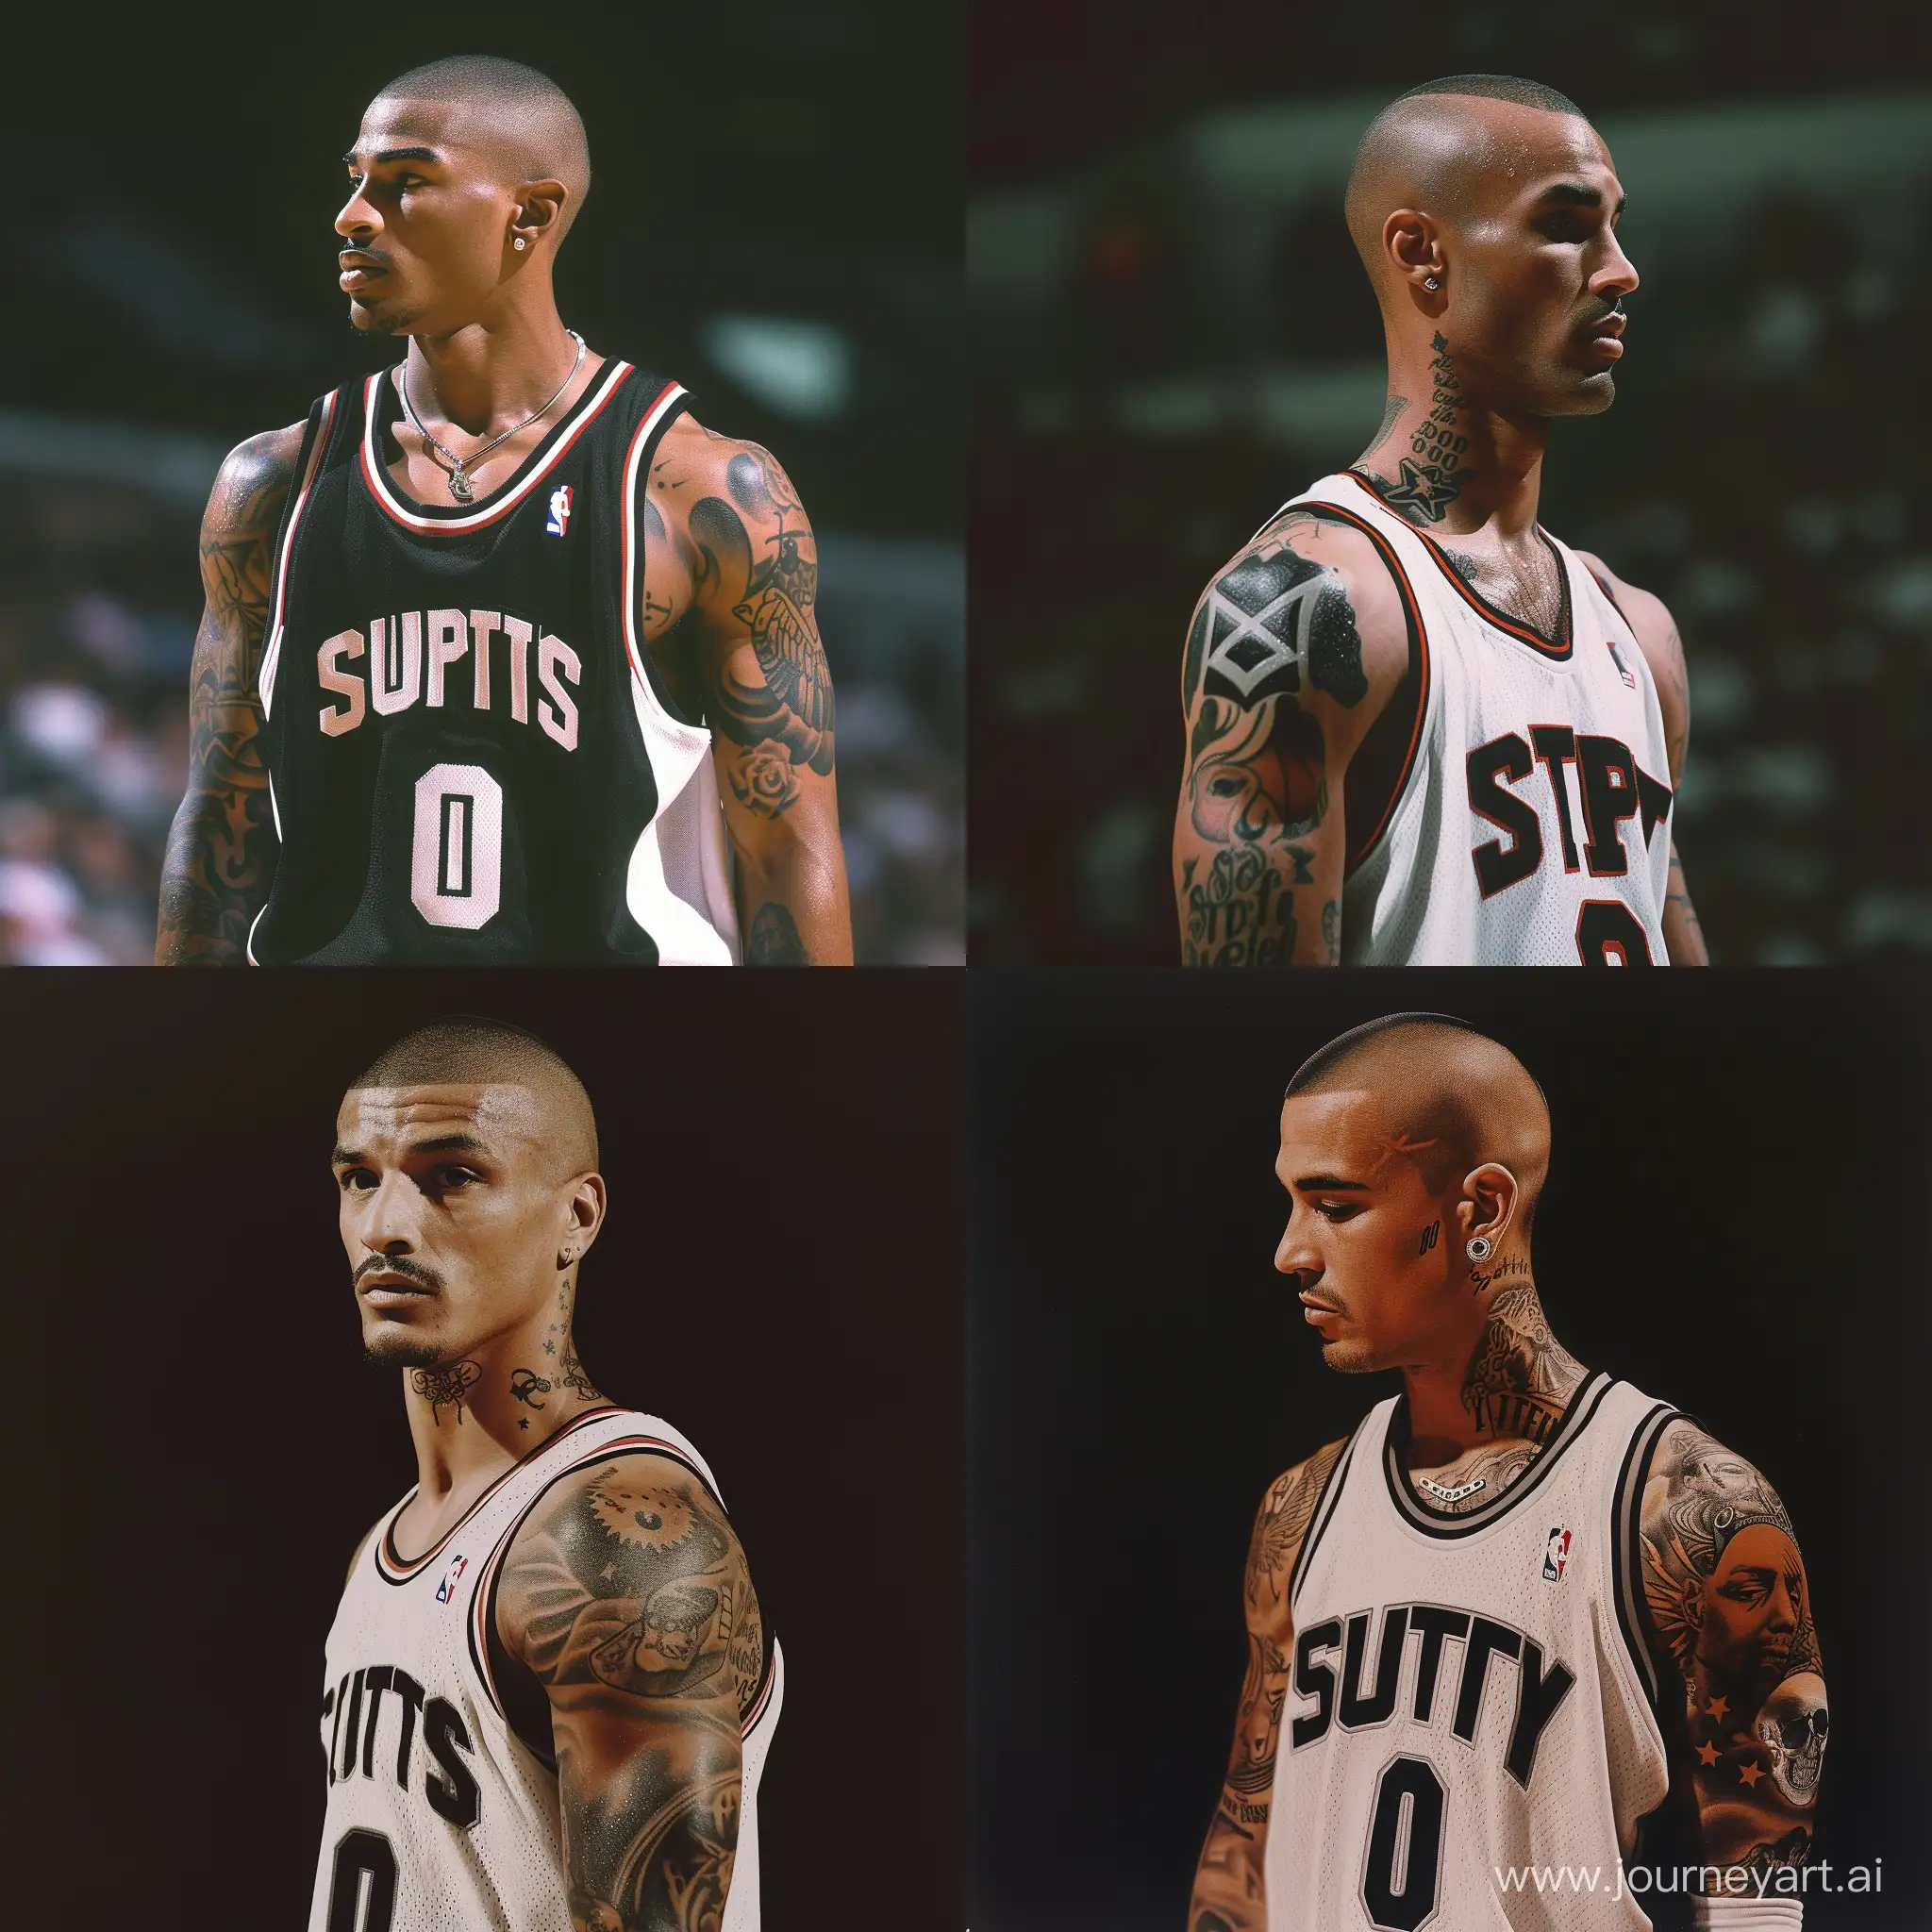 Michael-Jordan-Look-Alike-in-Spurs-Jersey-with-Buzz-Cut-and-Tattoos